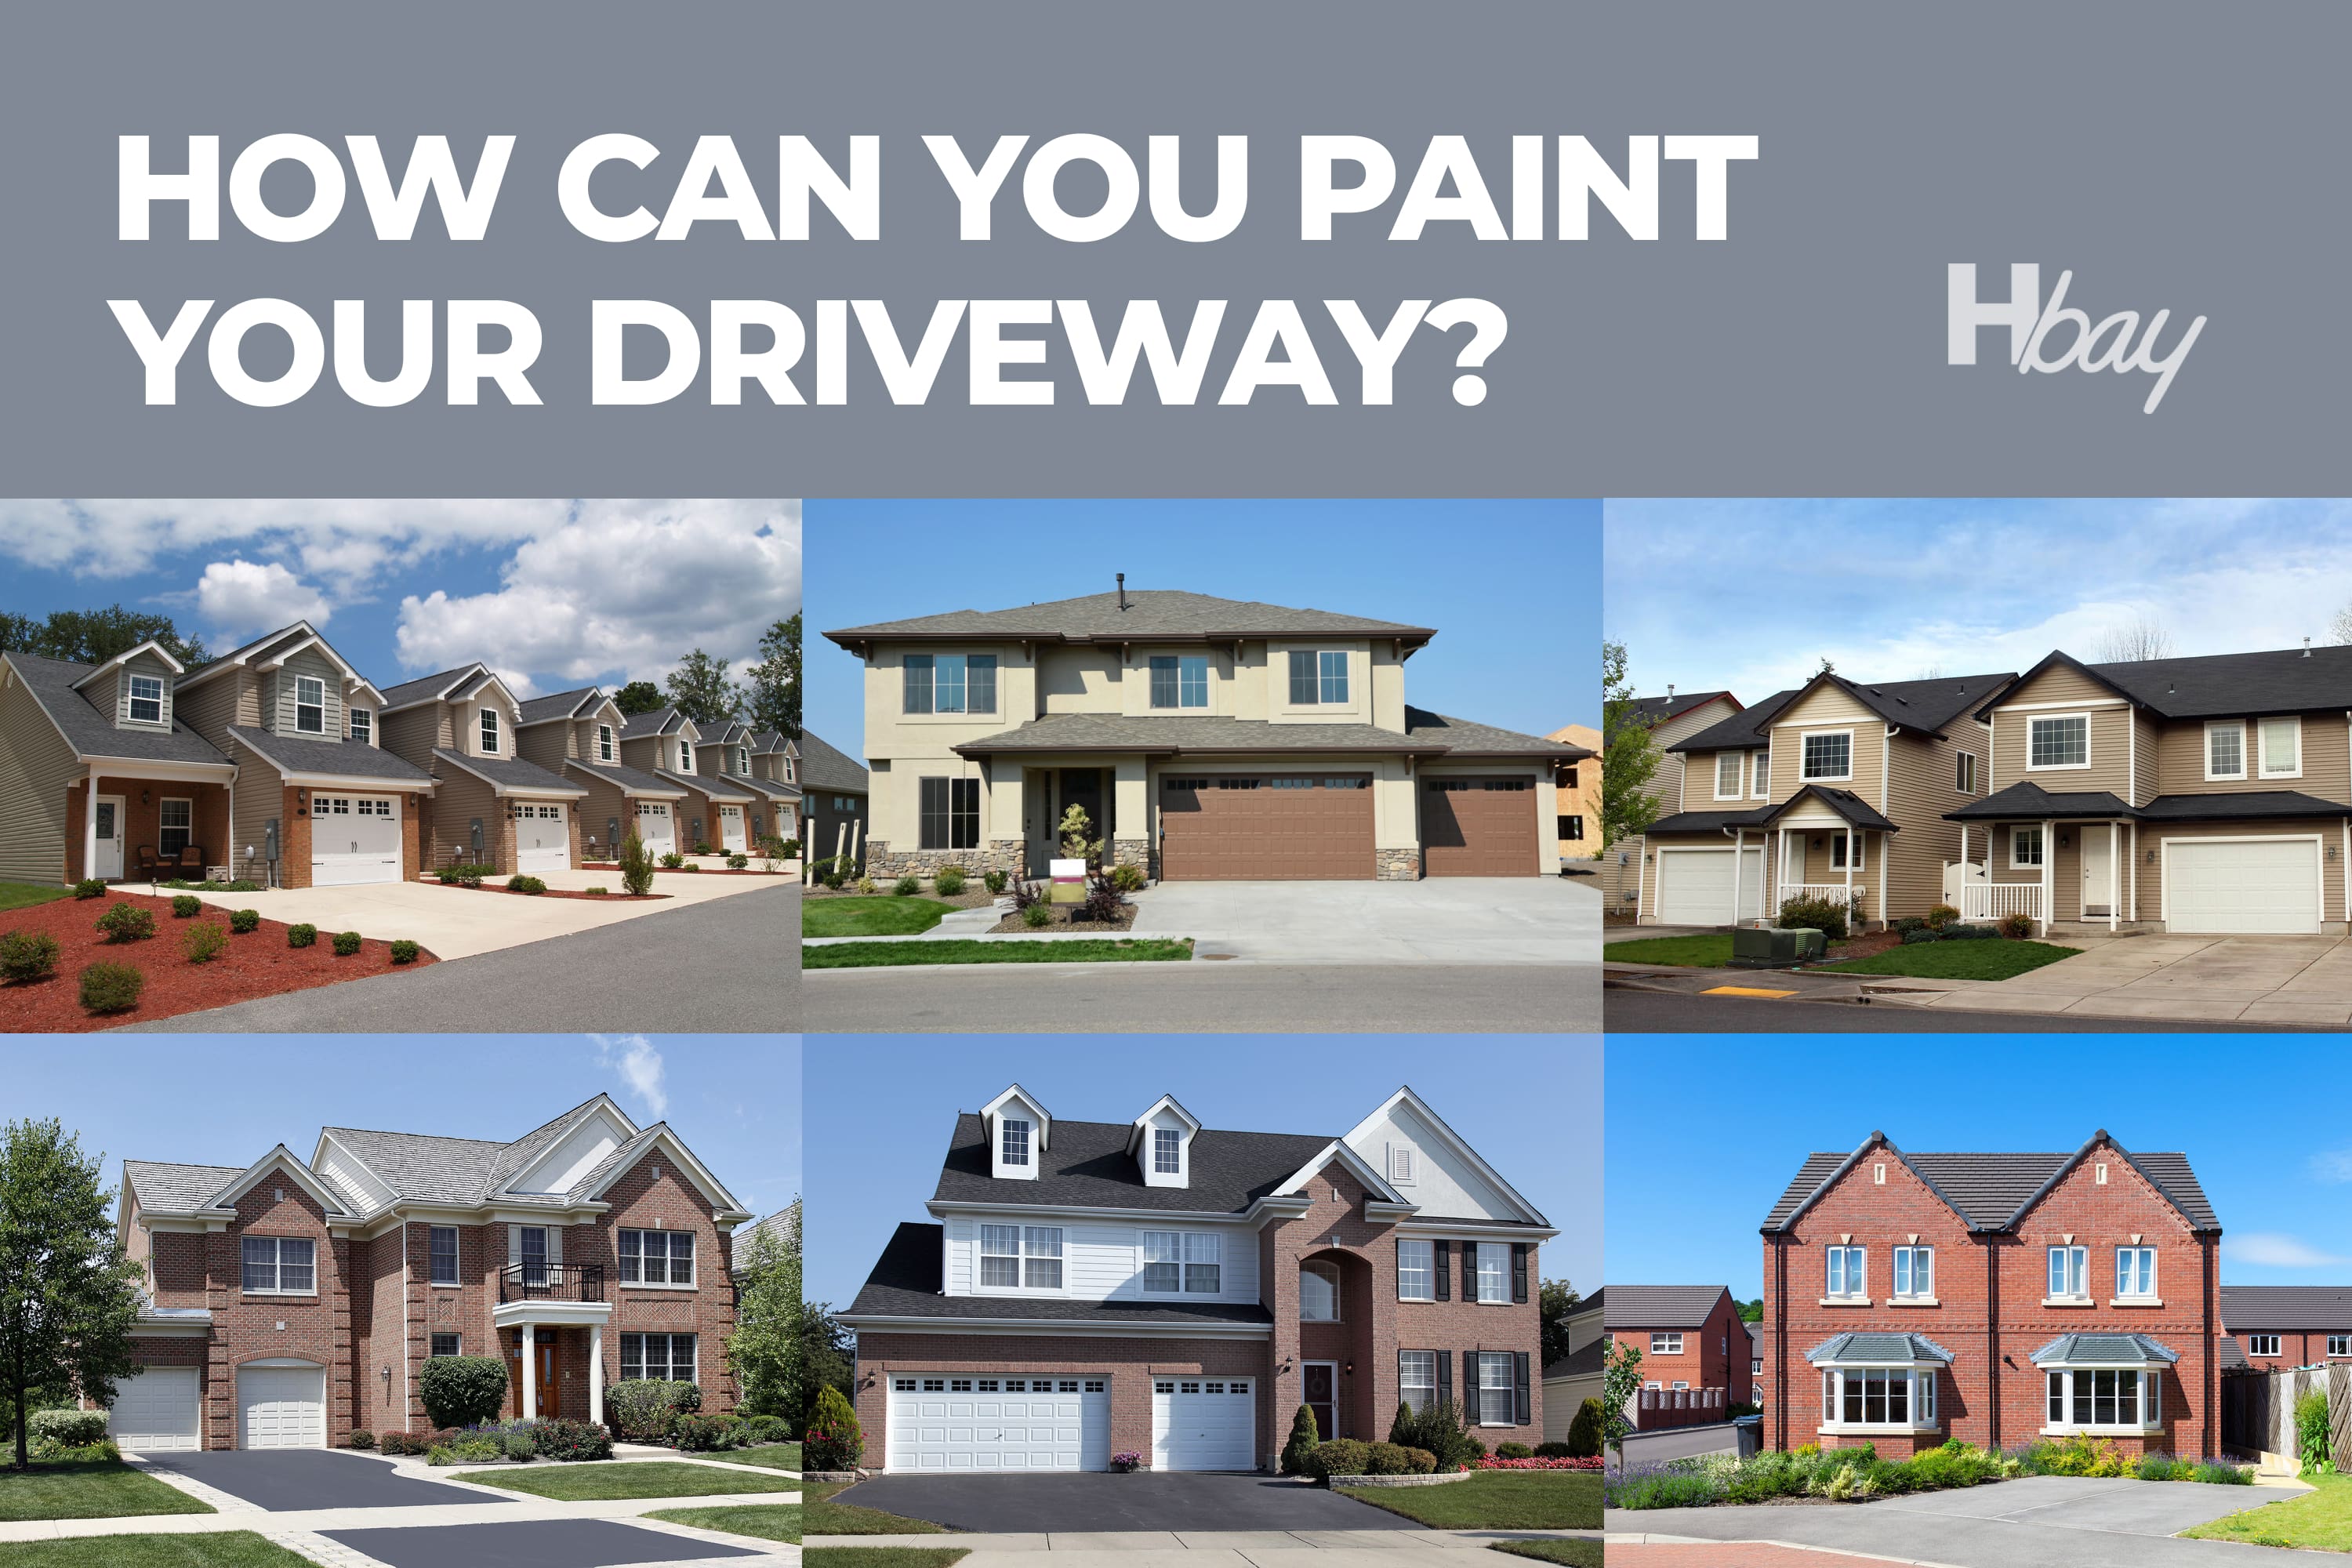 How can you paint your driveway